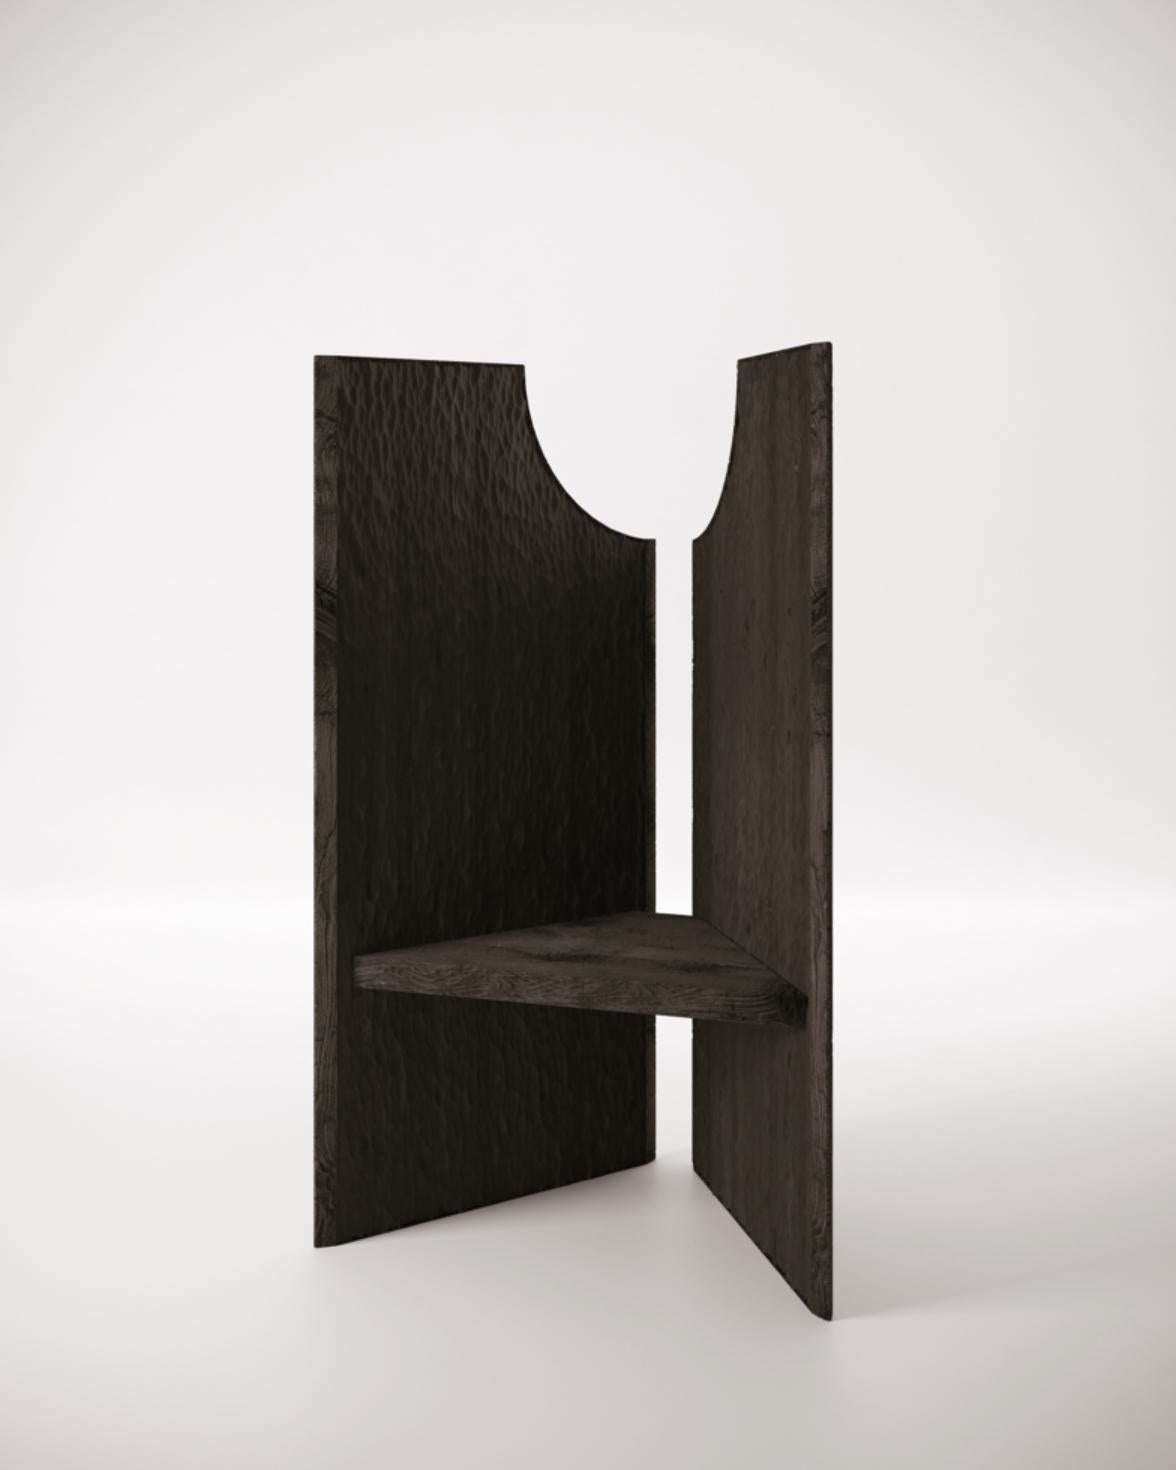 Nut throne by Studiopepe
Dimensions: W 140 x D 140 x H 73 cm
Materials: Black Wood

Multifaceted design agency Studiopepe was founded in Milan in 2006. Eclectic, voguish, it is the
brainchild of Chiara di Pinto and Arianna Lelli Mami, both of